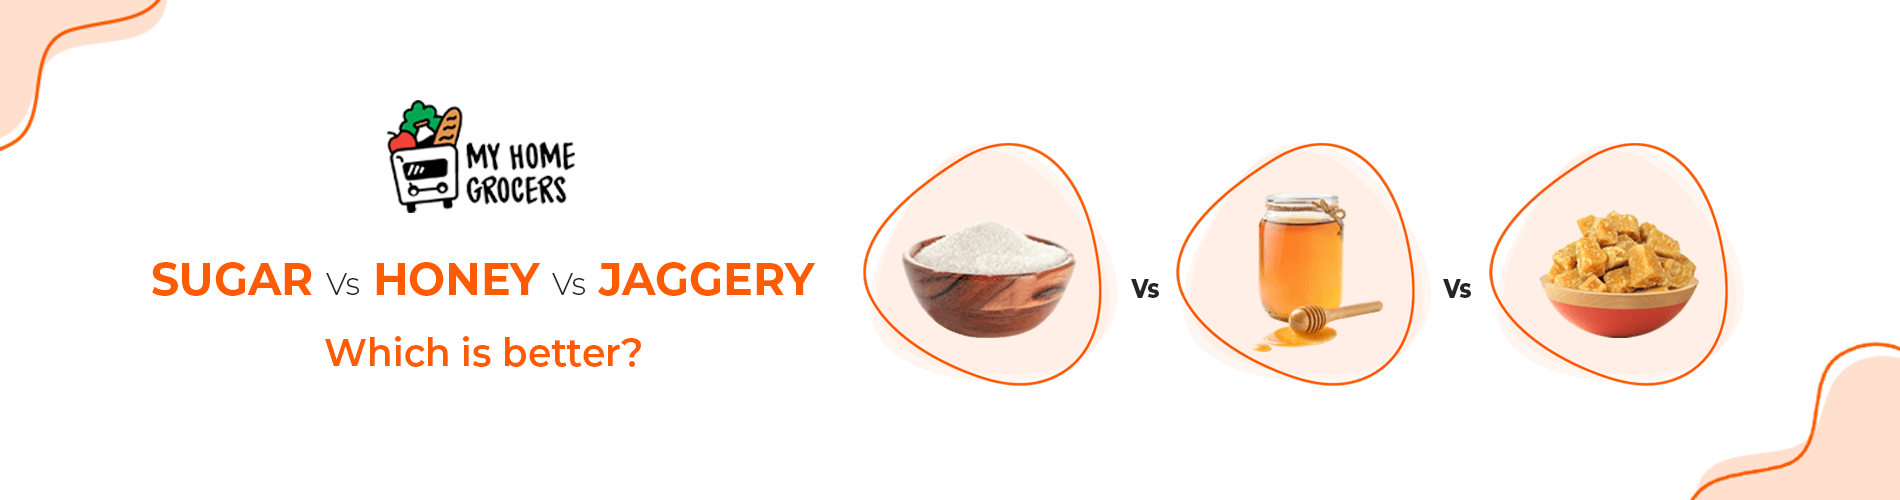 Sugar vs Honey vs Jaggery- Which is better?